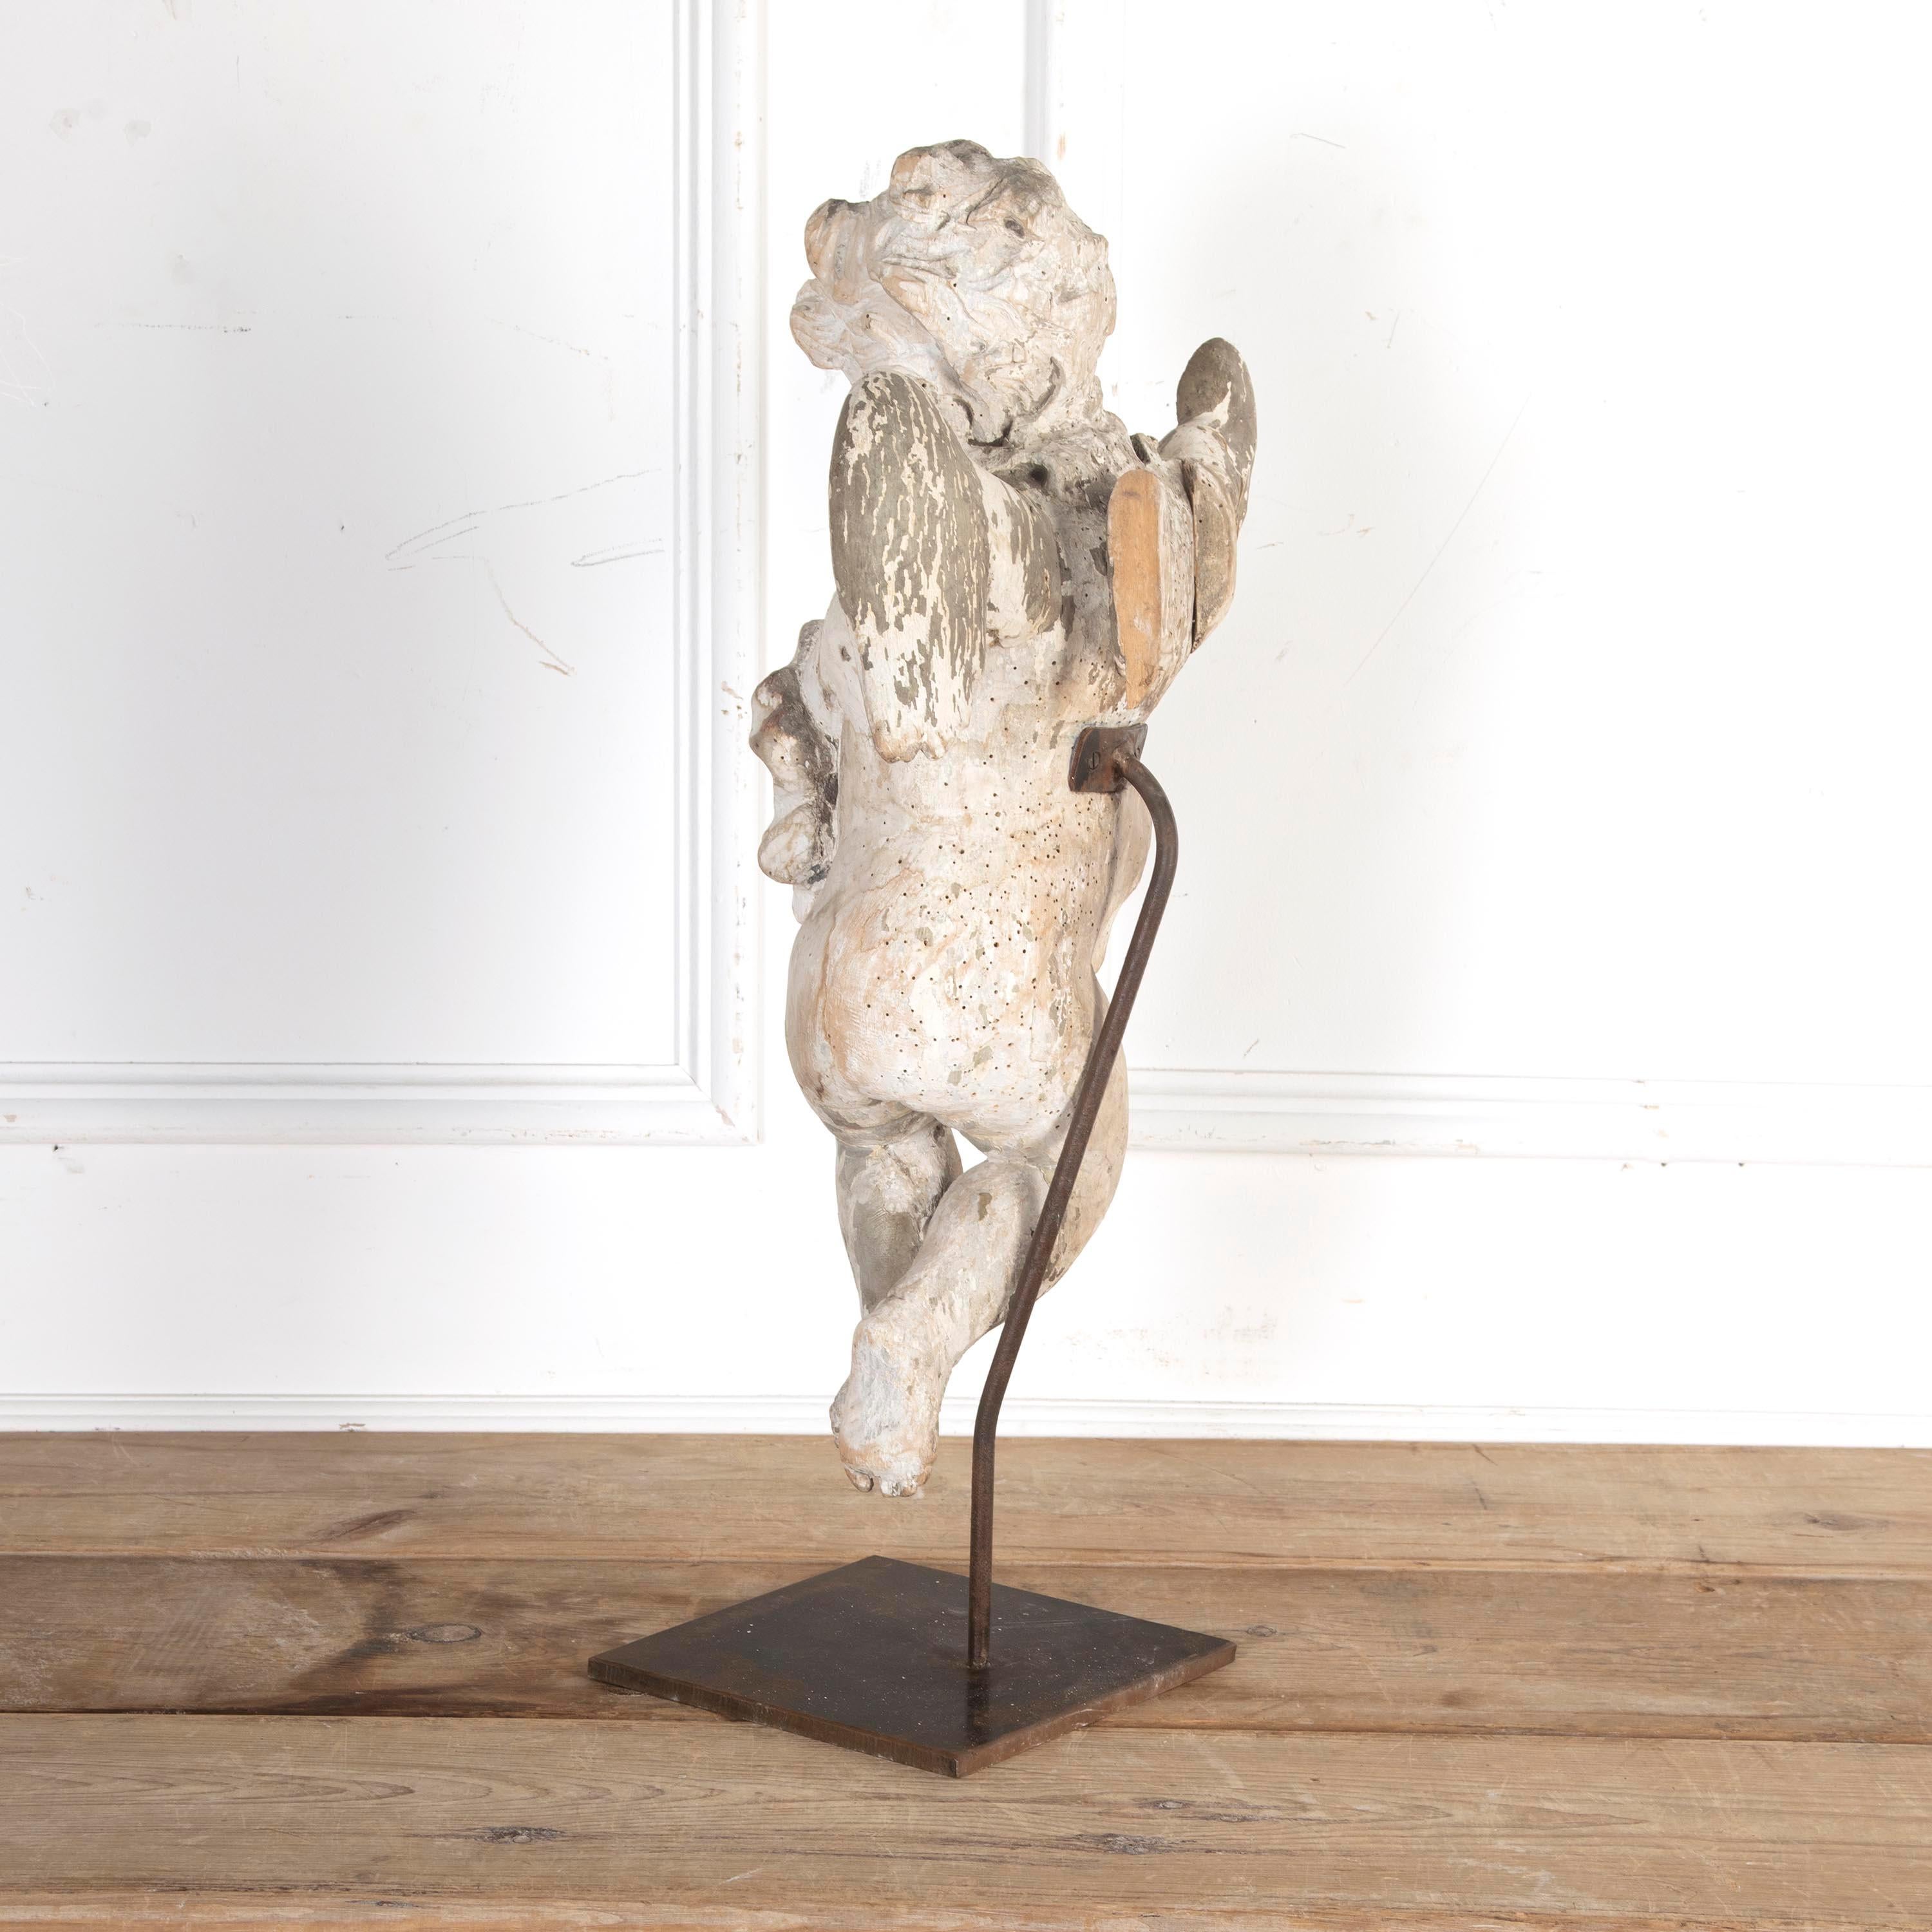 Large 17th century carved wooden cherub mounted on a metal stand.

These 'putti' were a prominent part of religious and mythological iconography in Renaissance and Baroque Italy.

Featuring the remains of paint to the curled hair and fabric